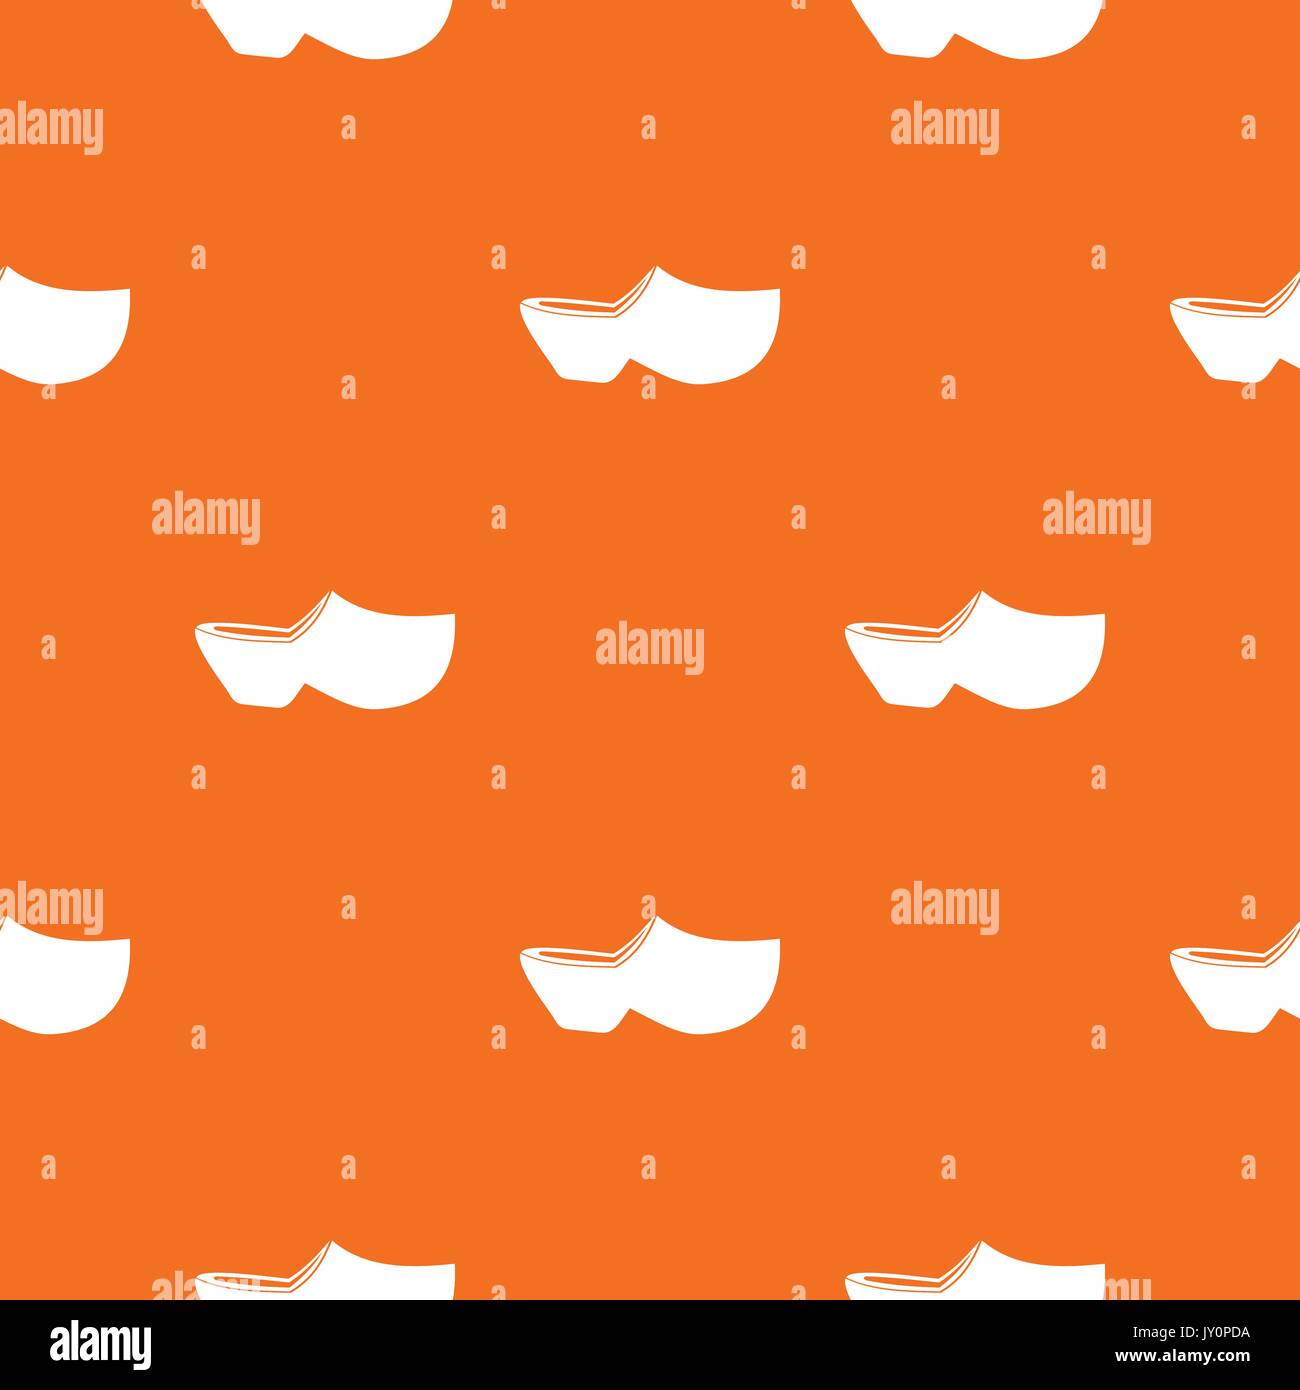 Clogs pattern seamless Stock Vector